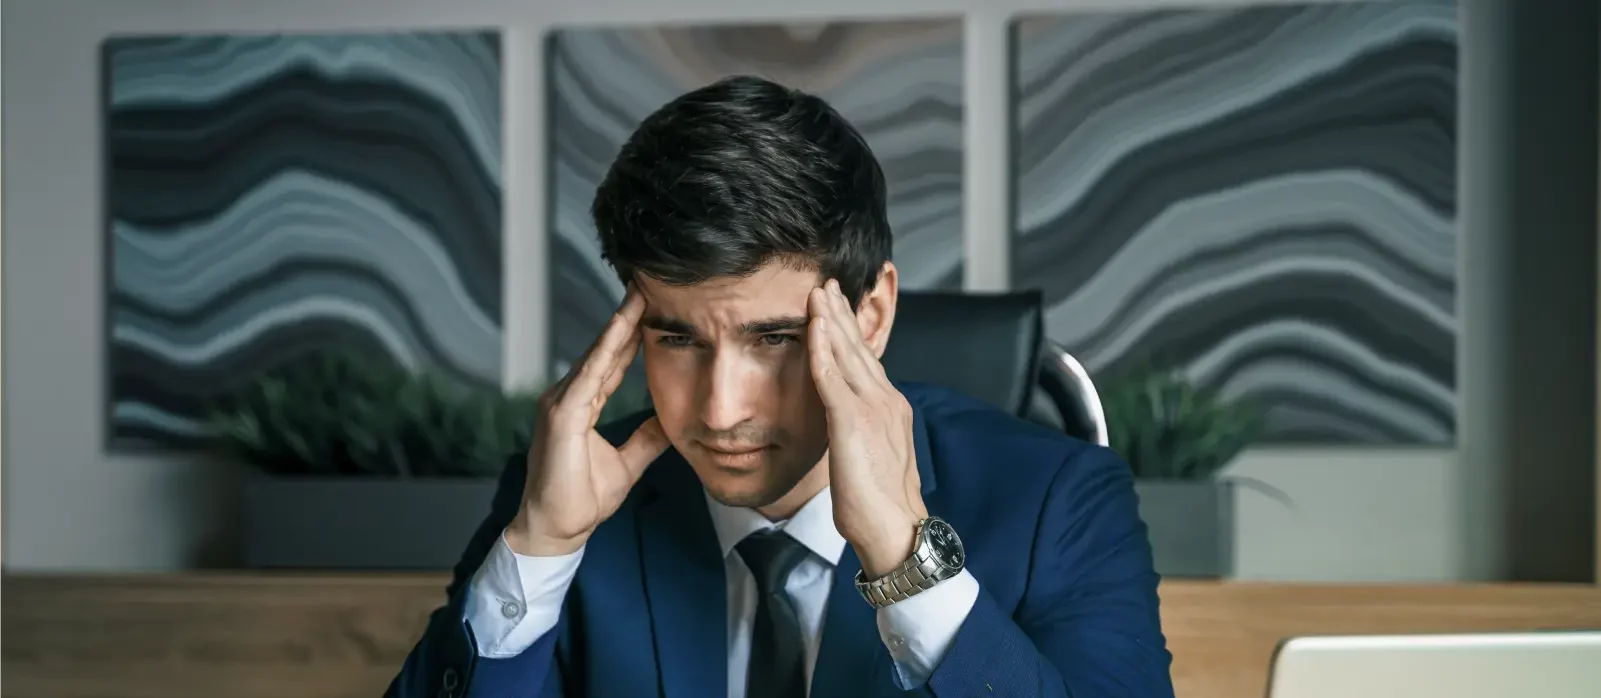 anxiety in the workplace